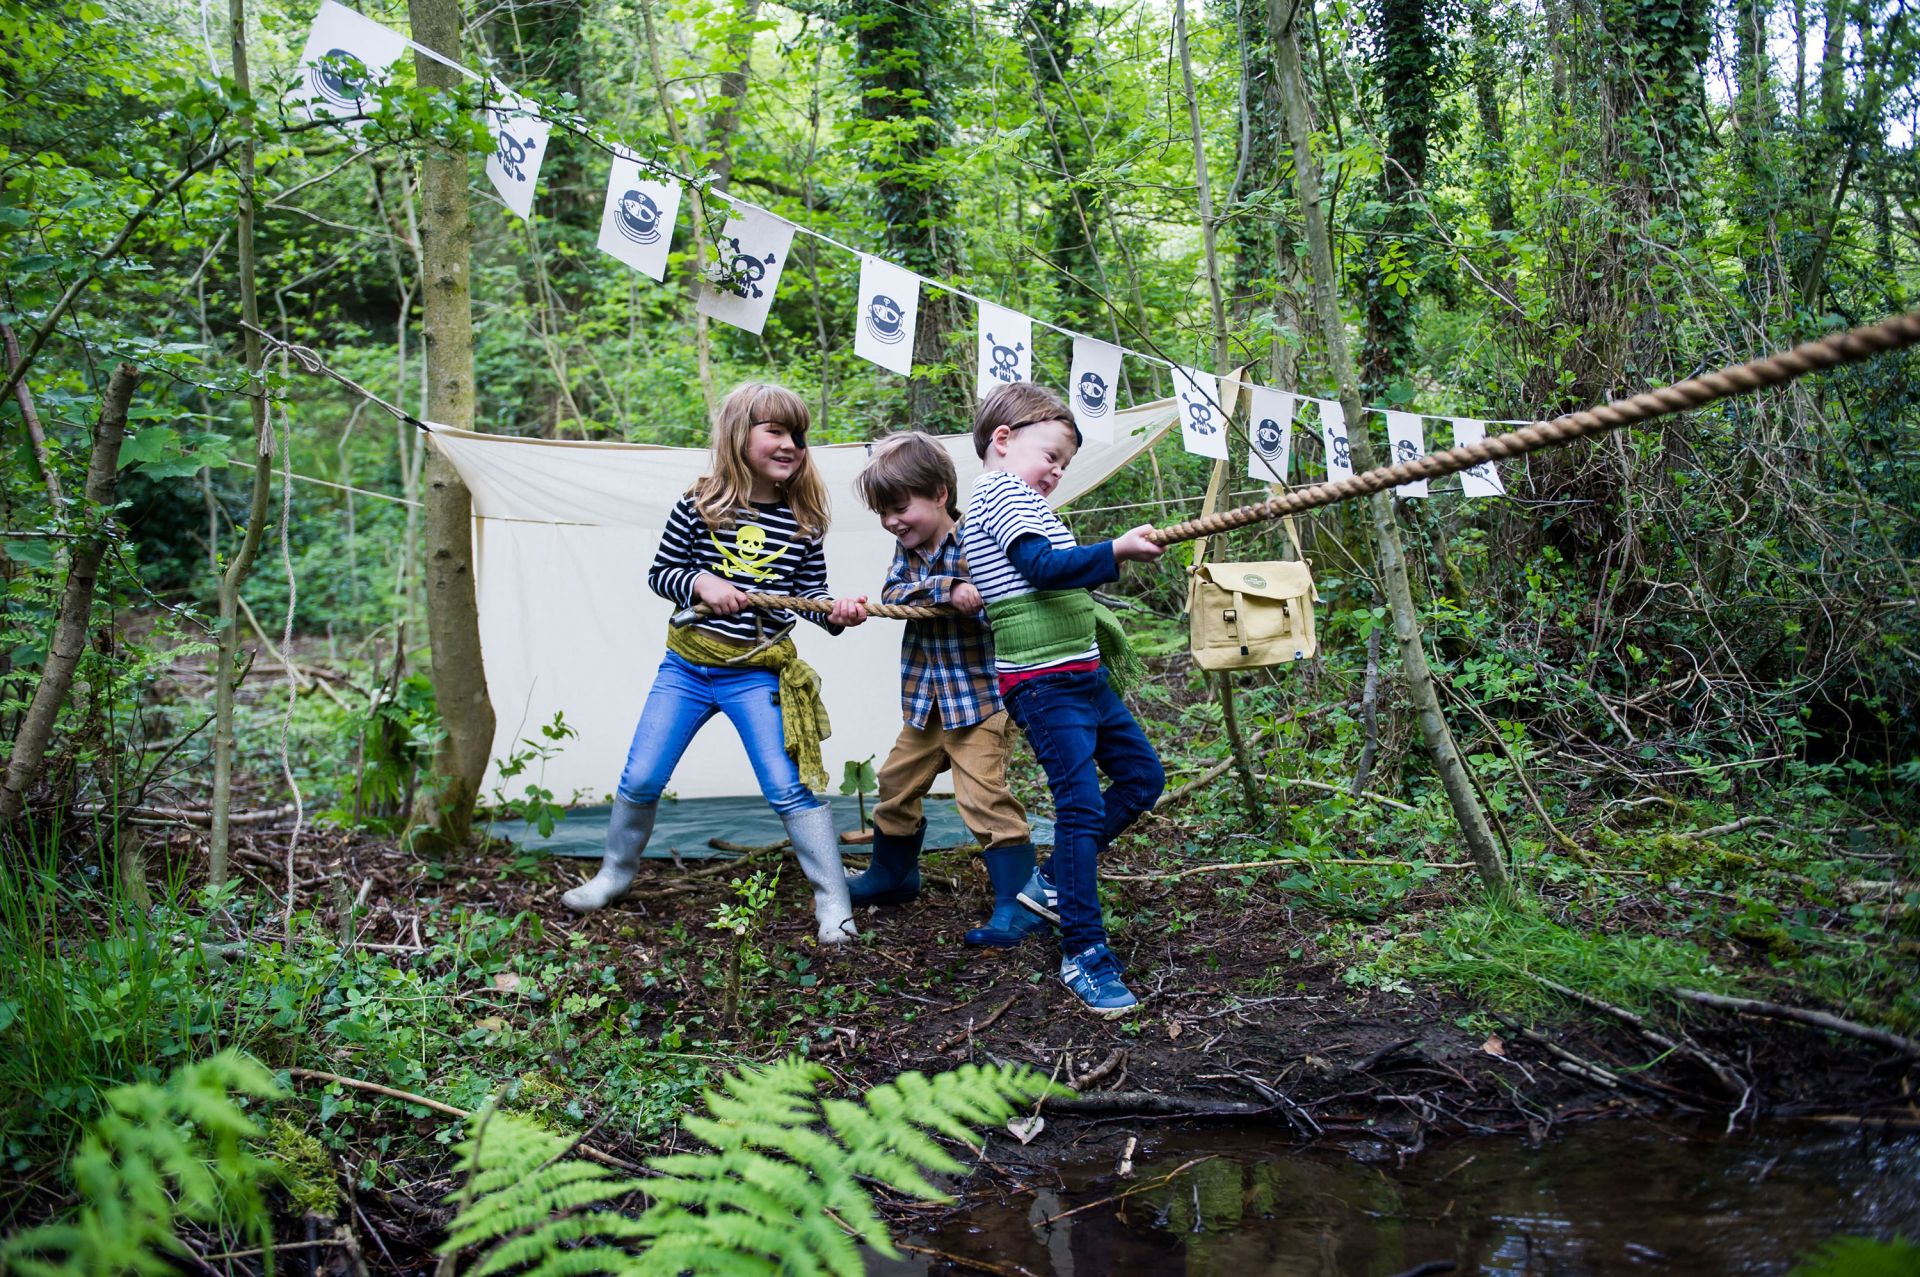 <p>                     Encourage your kids to sail the ships and conquer land with a fun-filled pirate adventure. Ahoy, me hearties!                   </p>                                      <p>                     String up some flags between trees, provide a couple of eye patches and allow their imaginations to run wild as they embark on a treasure-finding quest. How about a sea shanty or two? Ready-made den kits can be found online and will provide even more pirate-themed fun.                   </p>